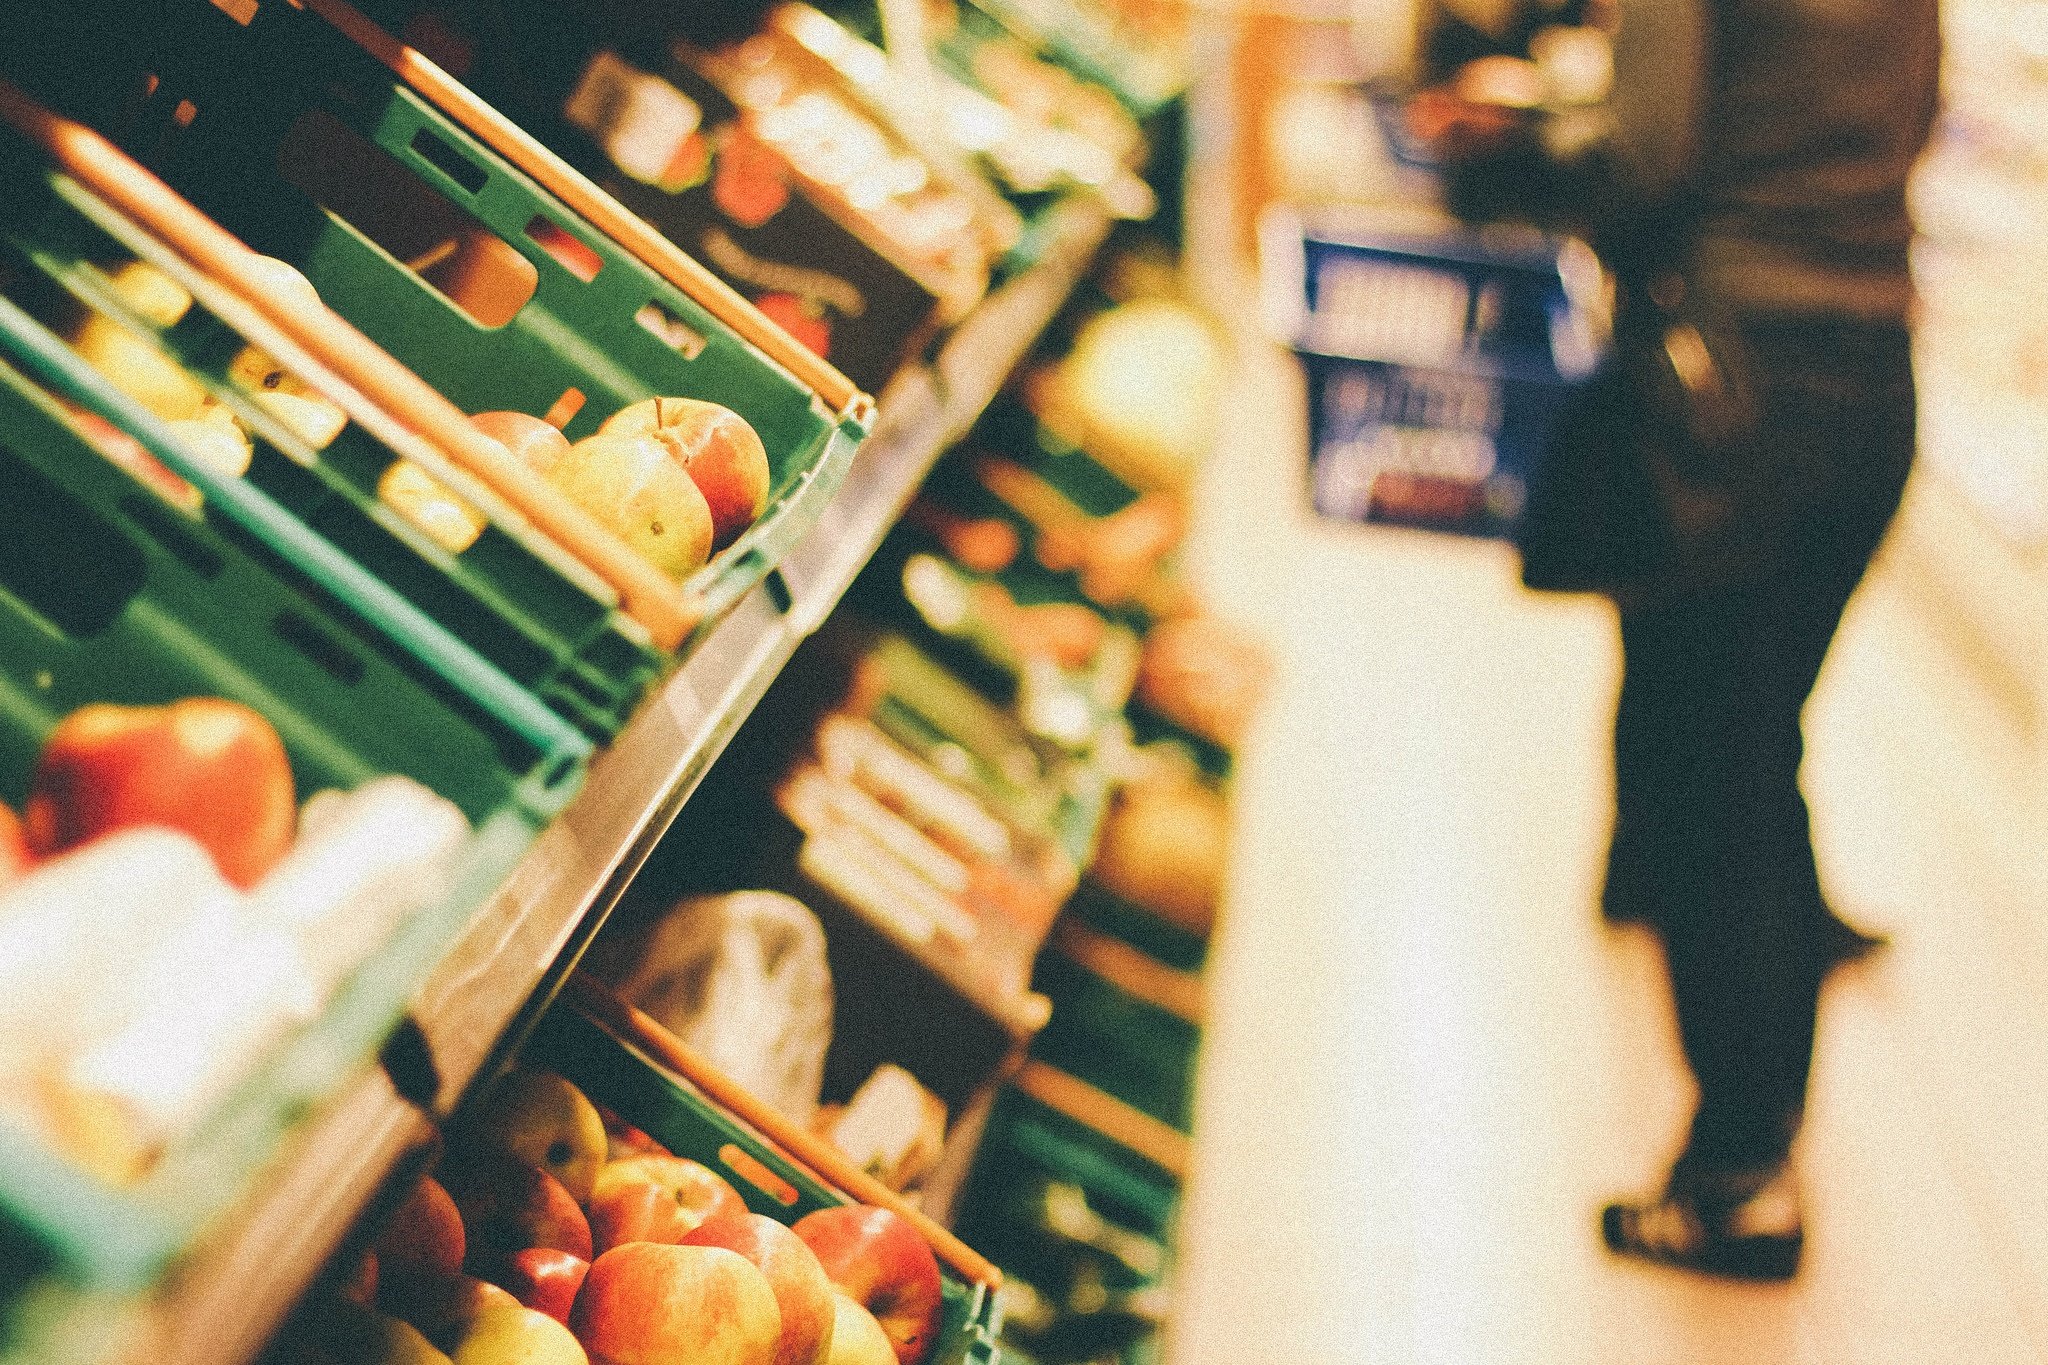 10 Supermarket Spending Tricks You Need To Know To Save More On Groceries